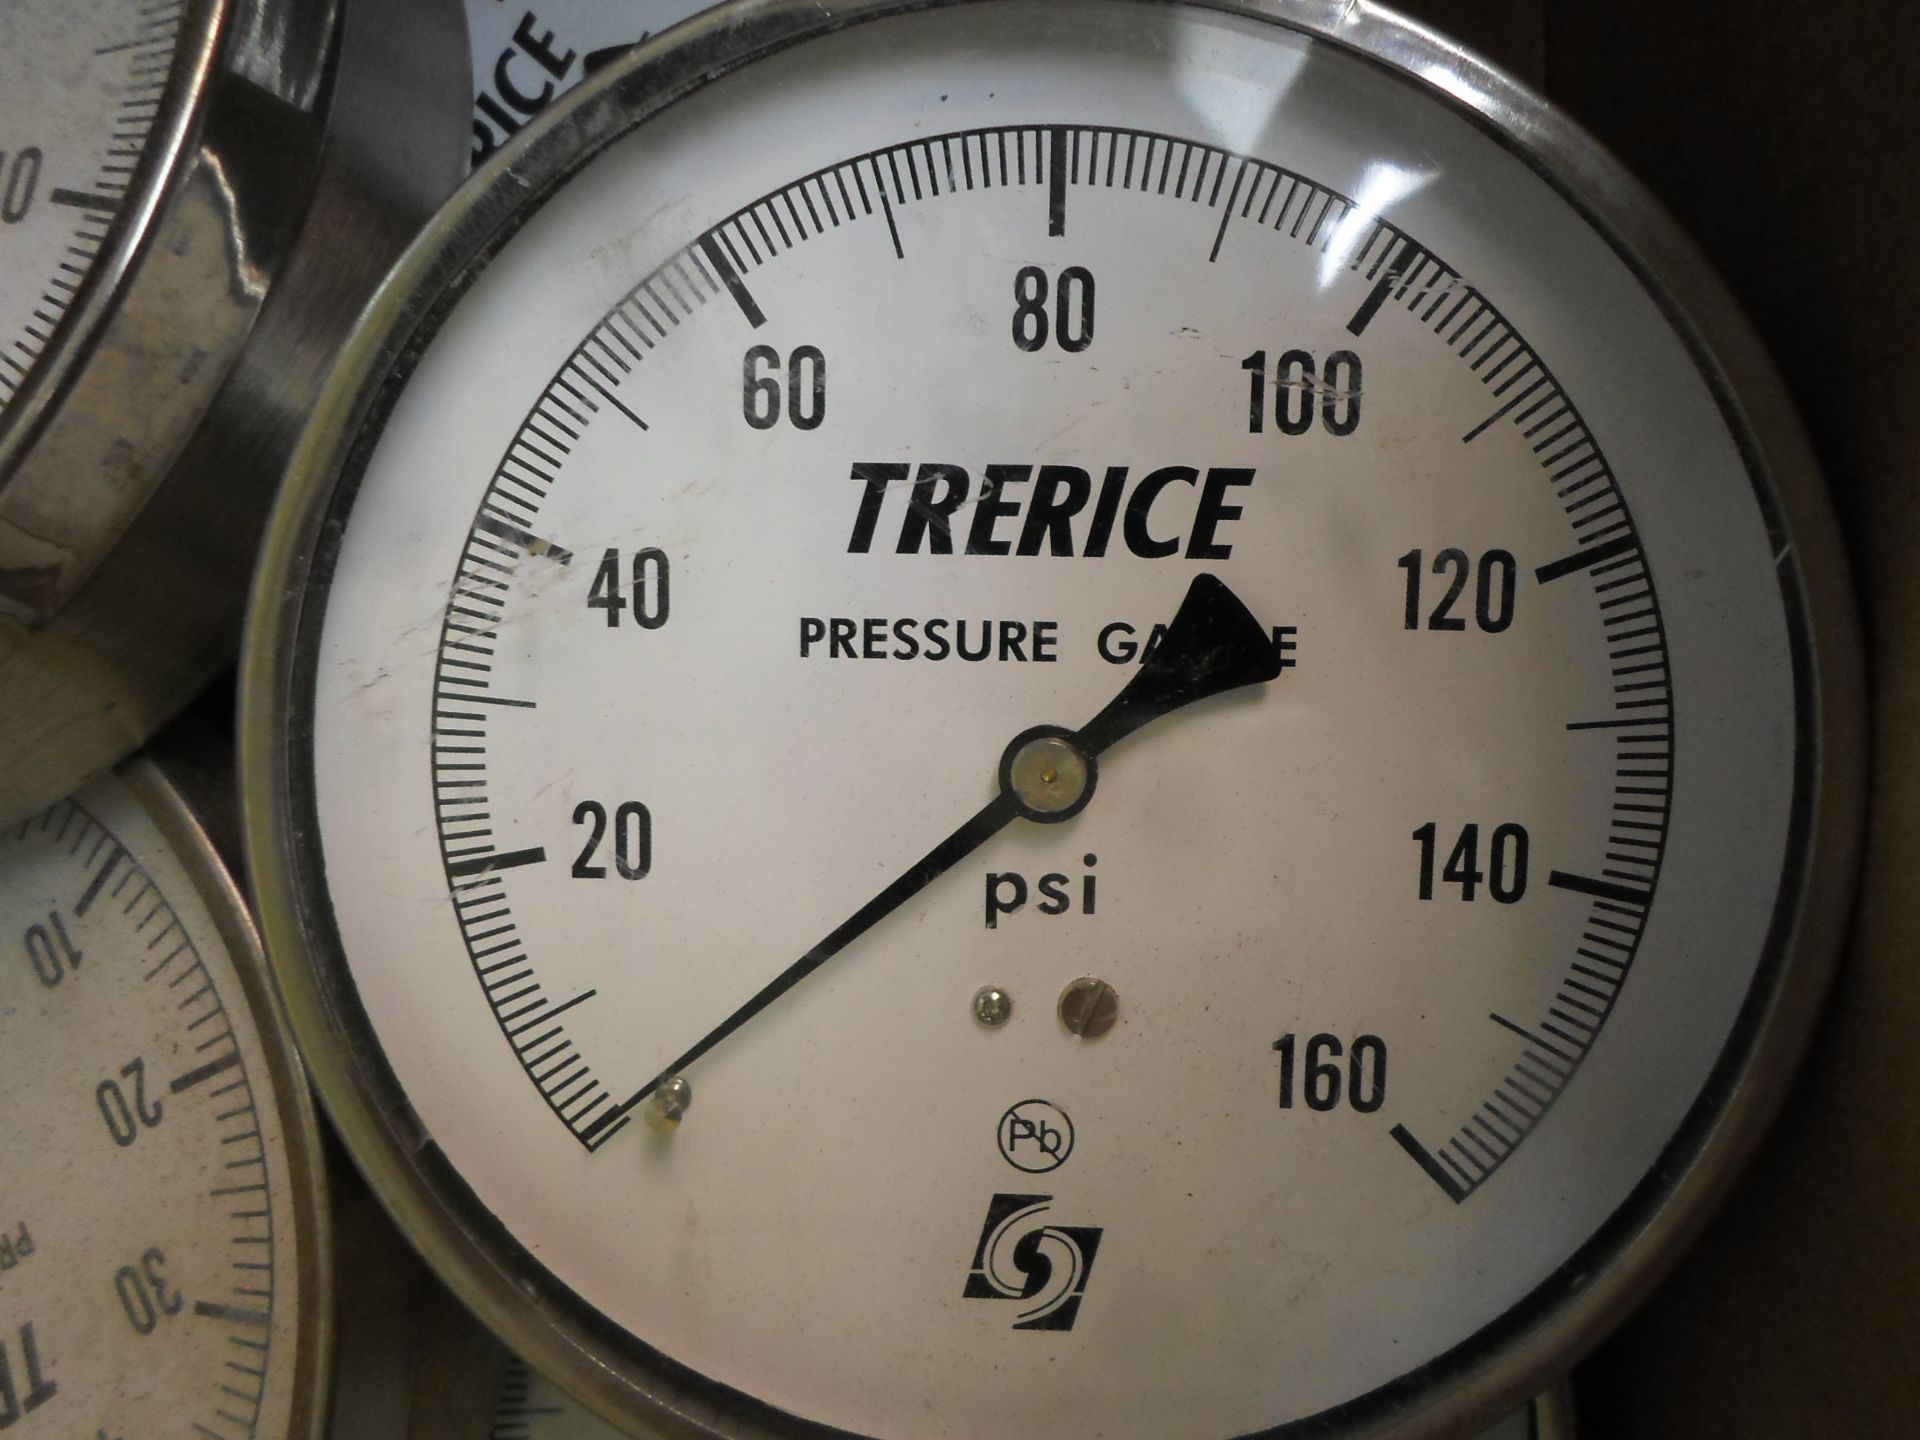 LOT OF Trerice Dial Pressure Gauges ASSORTED PSI RANGES - Image 2 of 2